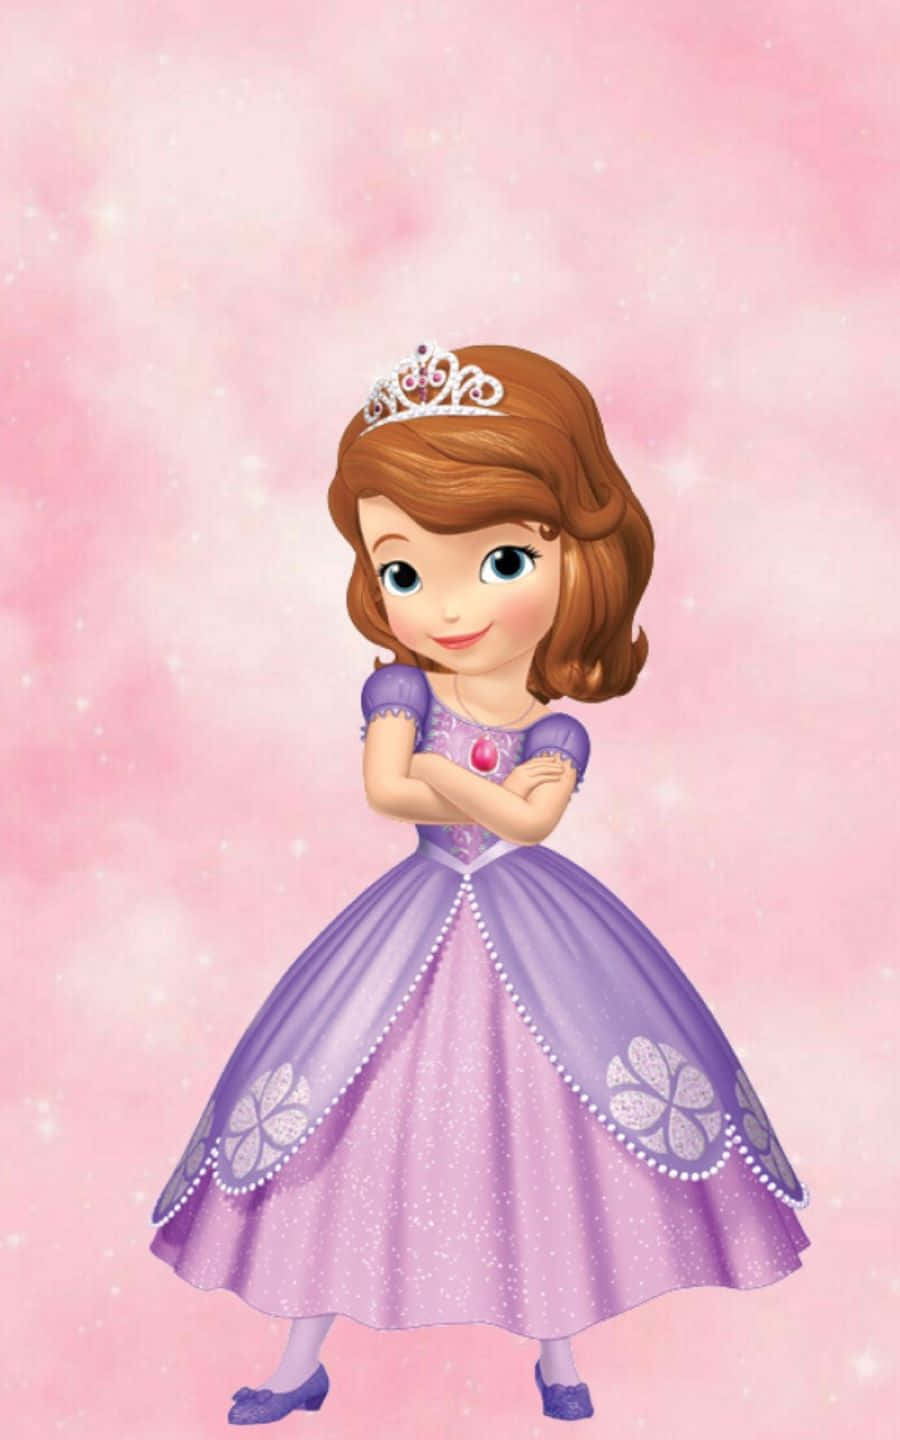 Sofia the First learning valuable lessons about life. Wallpaper